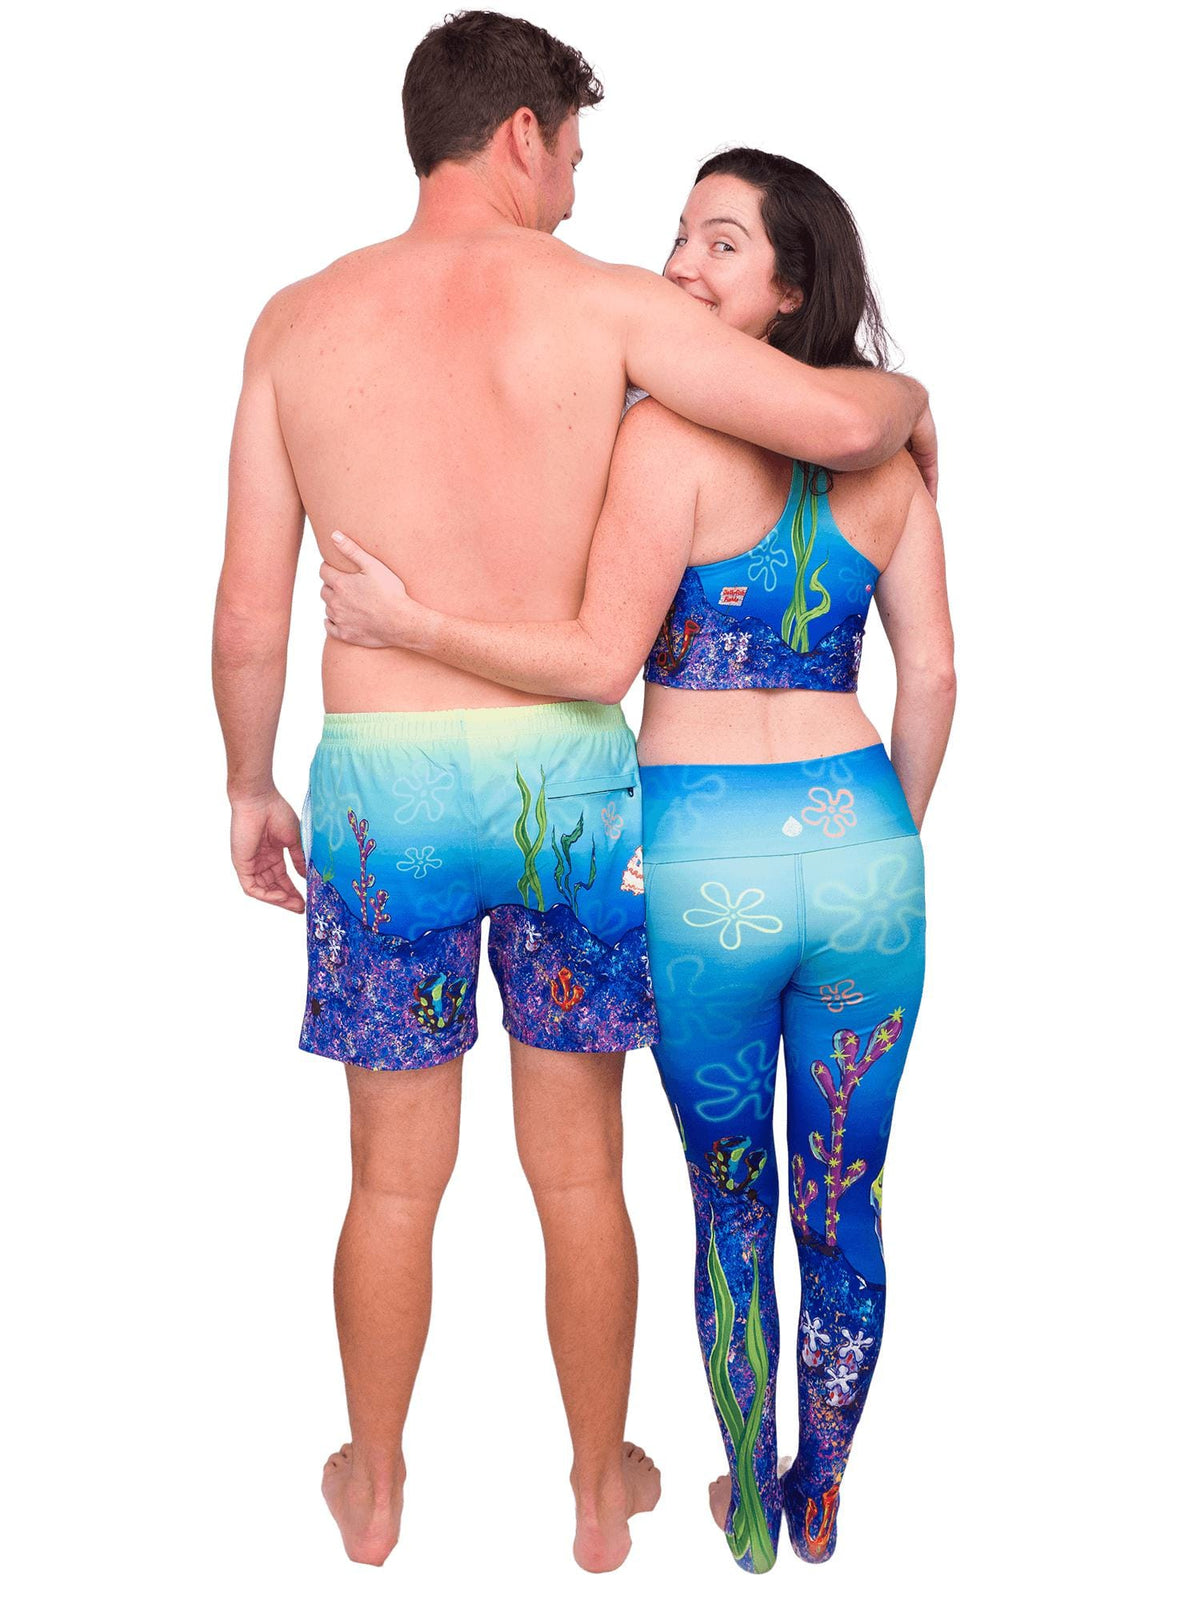 Model: Maddie is the Program &amp; Outreach Director at Debris Free Oceans and a restoration ecology educator. She is 5’8”, 135lbs, and wearing a M. Dalton is a coral biologist who studies the relationship between communities and reef ecosystems. He is 6’3”, 200lbs and is wearing a L.